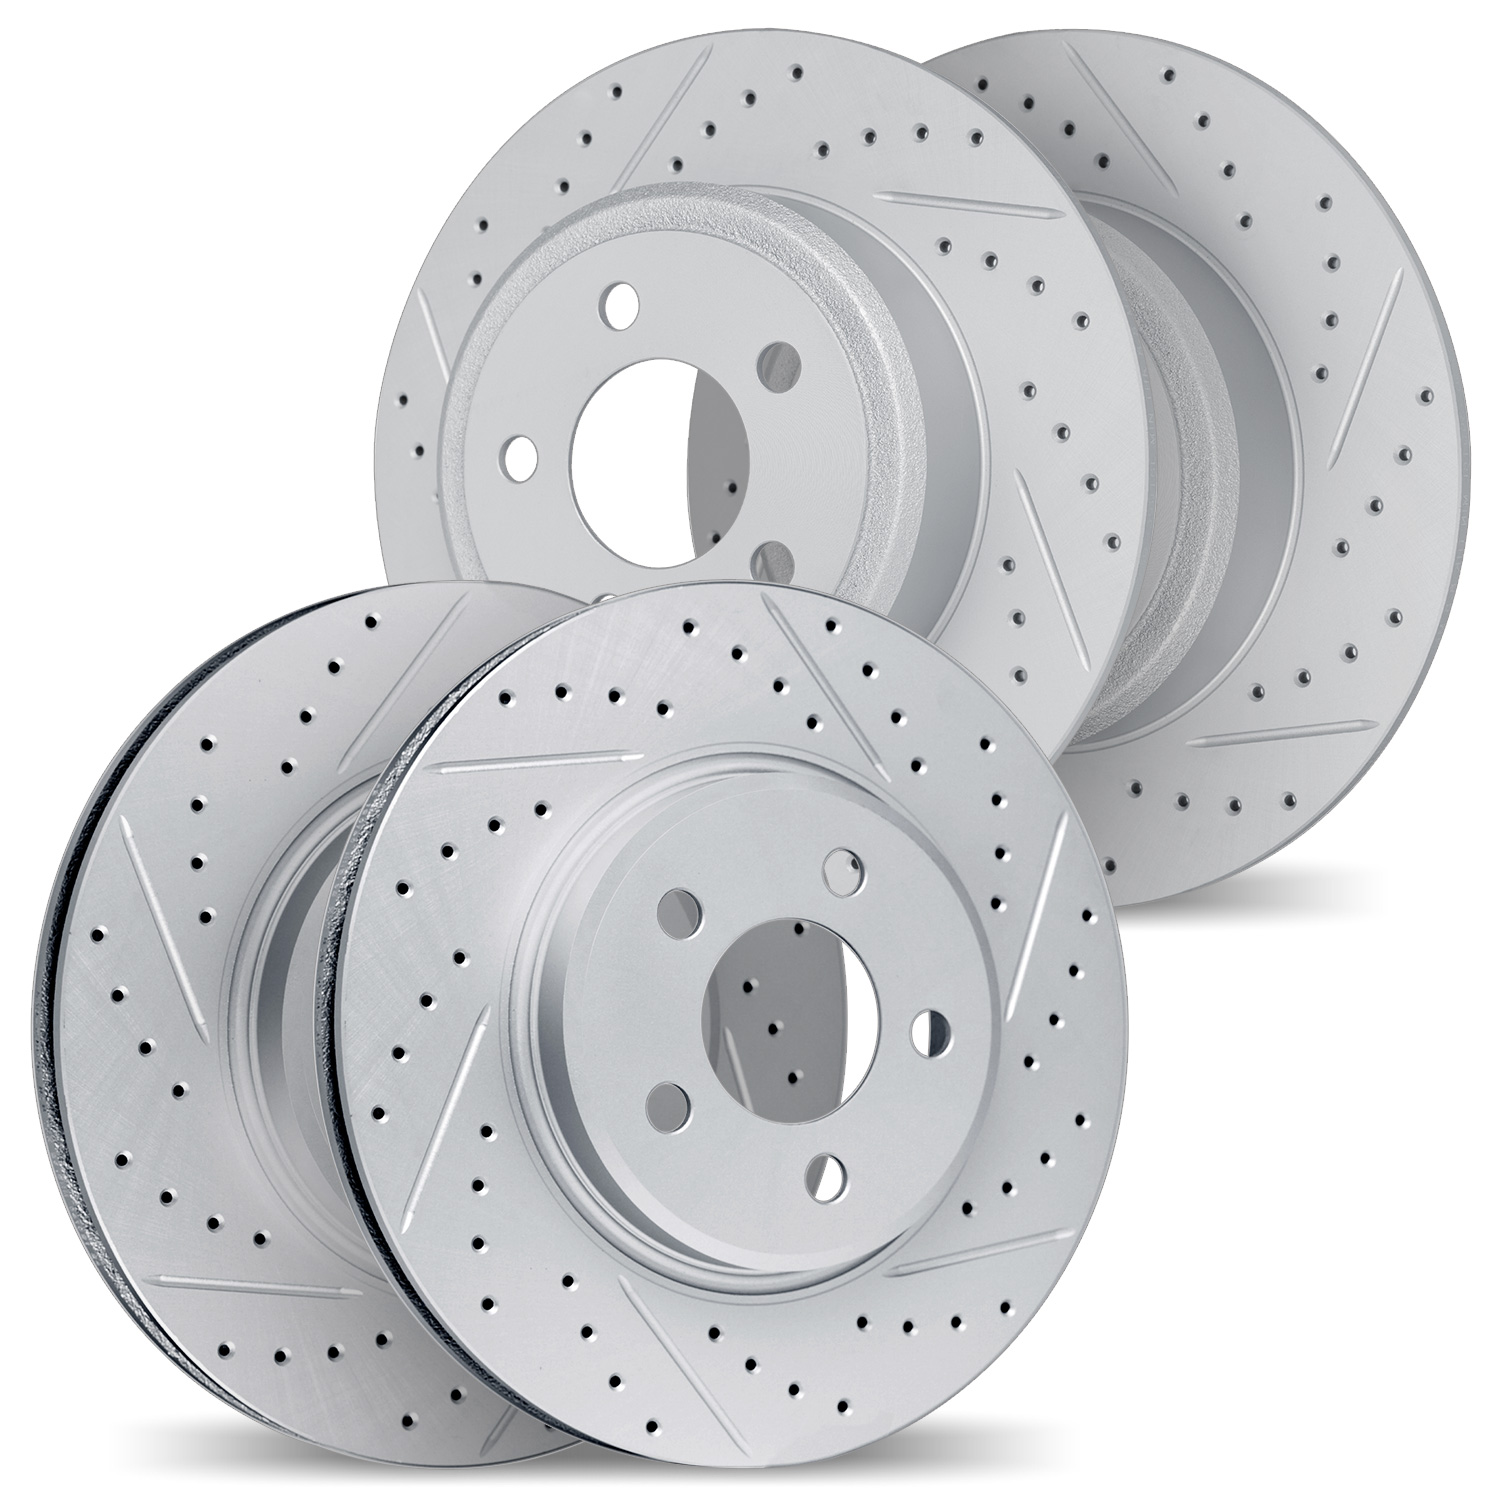 2004-03062 Geoperformance Drilled/Slotted Brake Rotors, 2014-2016 Kia/Hyundai/Genesis, Position: Front and Rear